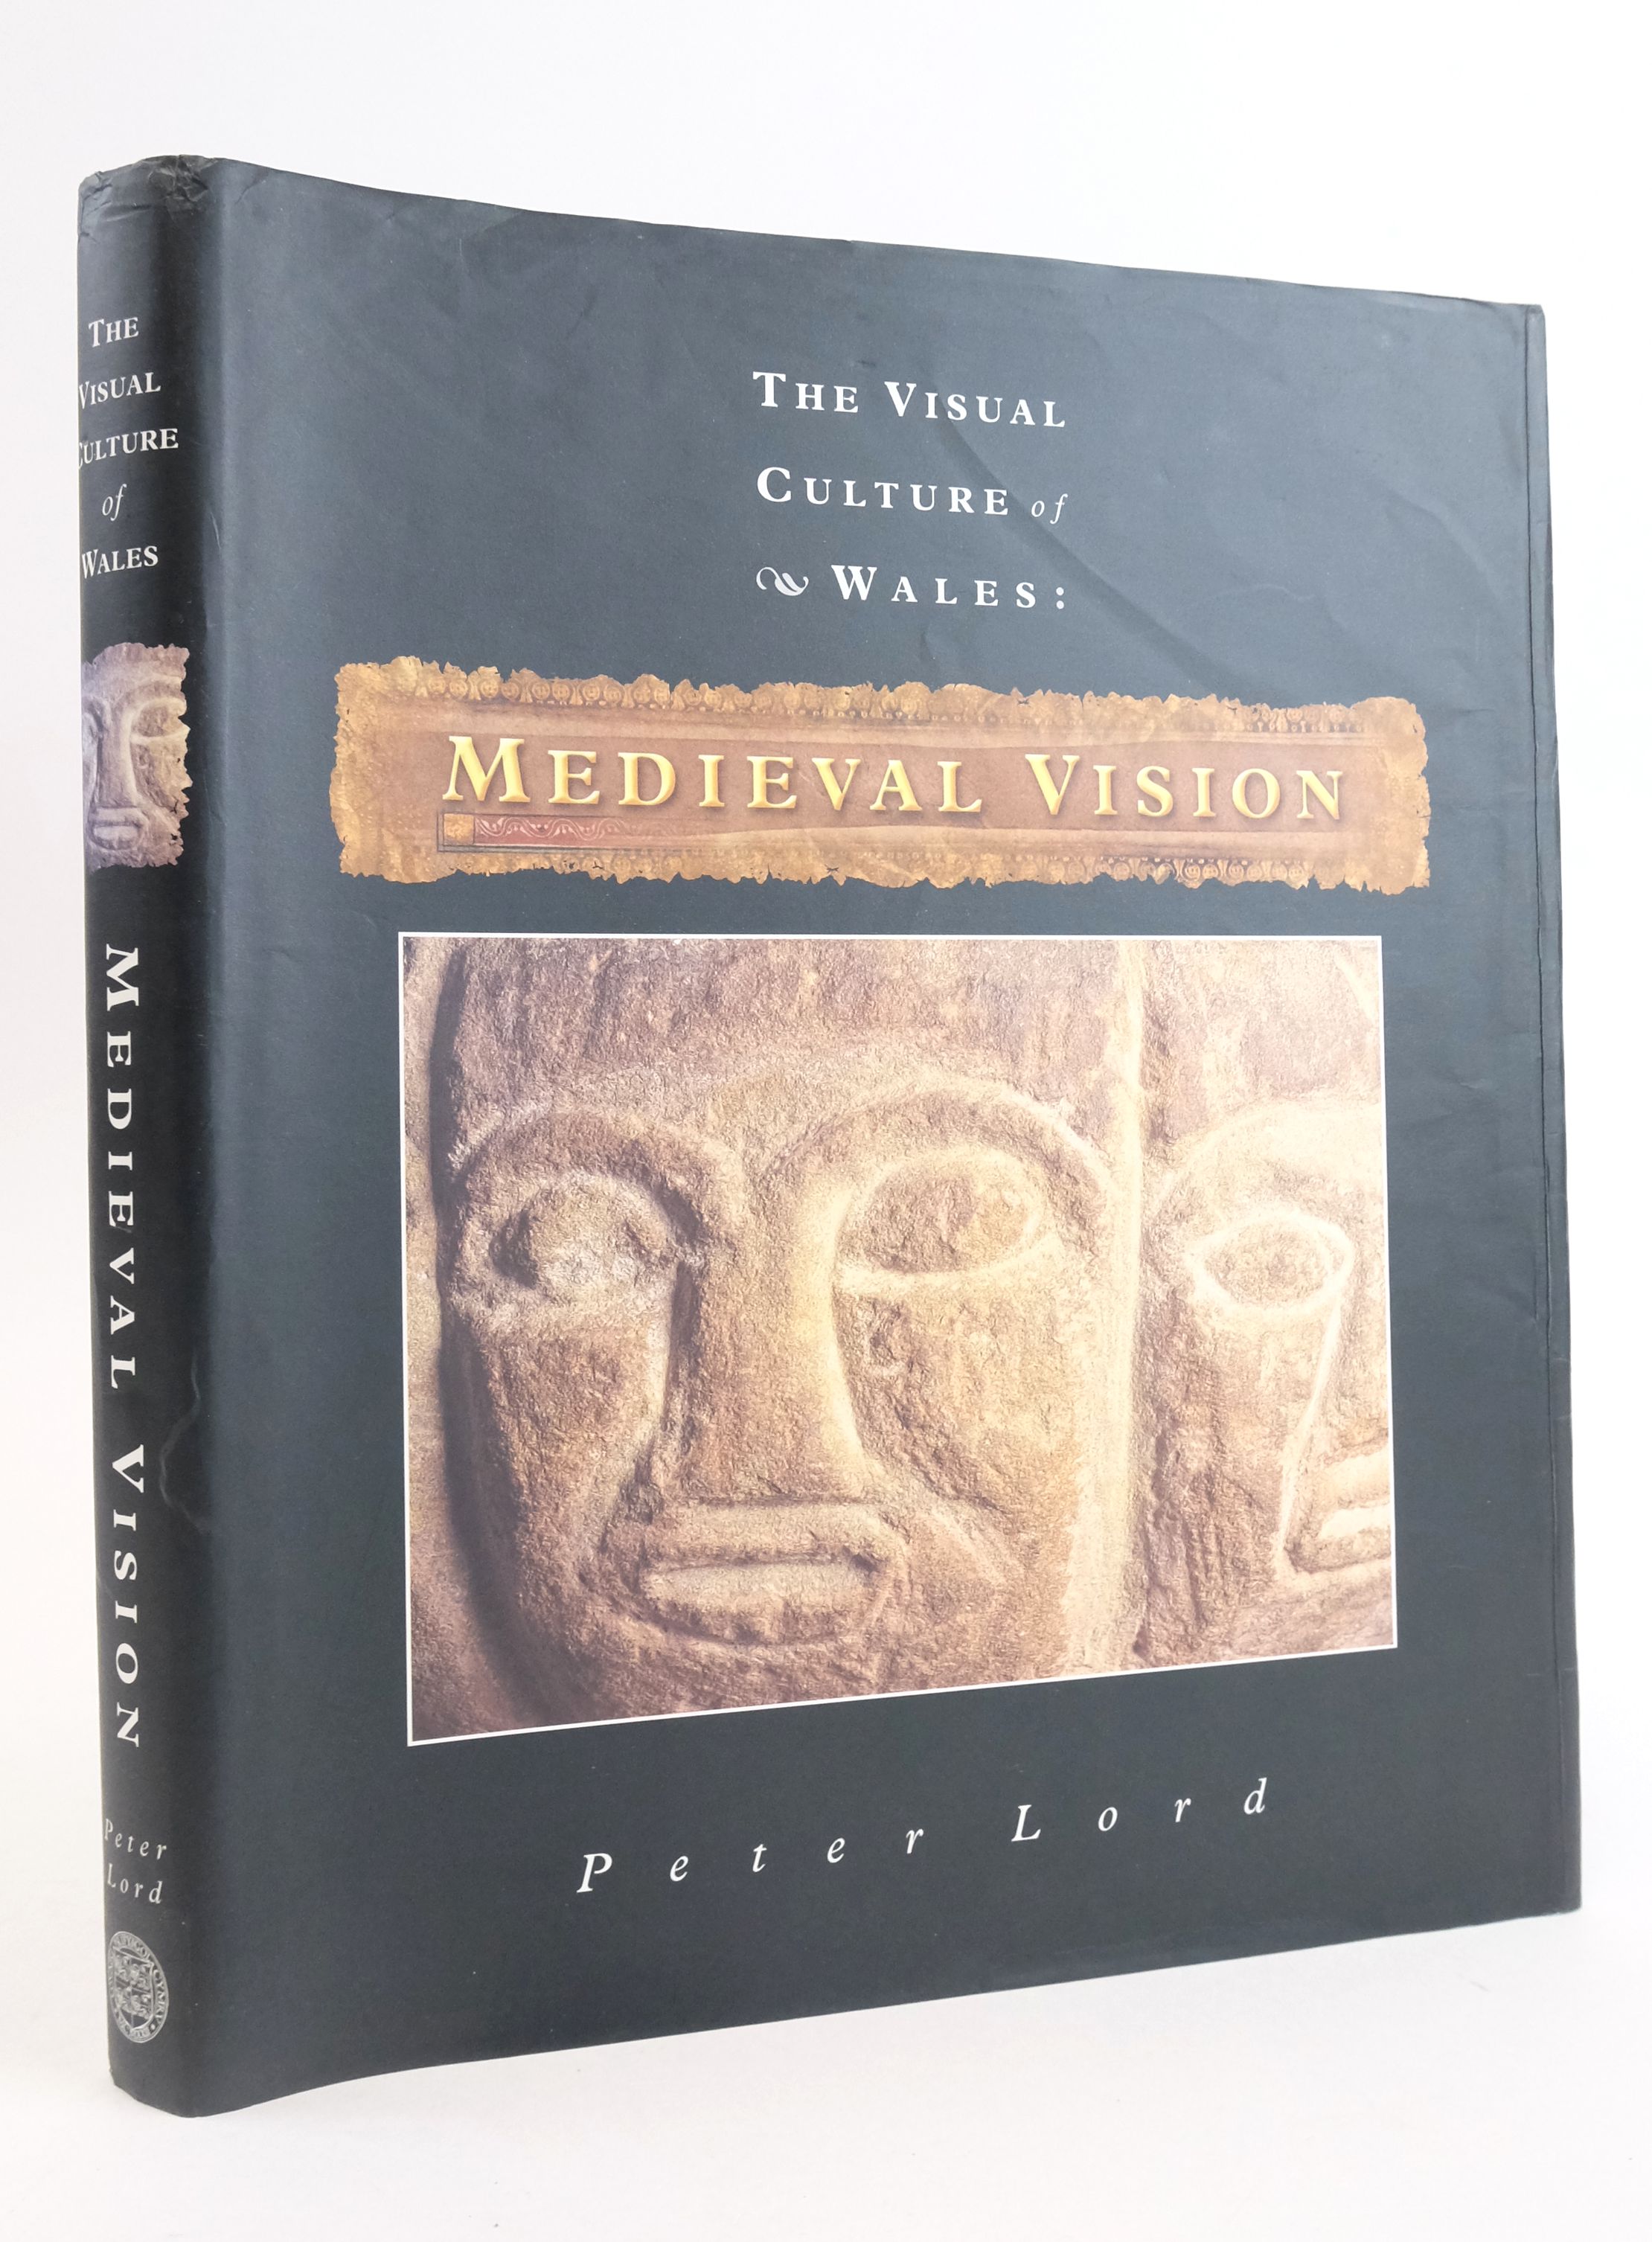 Photo of THE VISUAL CULTURE OF WALES: MEDIEVAL VISION written by Lord, Peter published by University of Wales (STOCK CODE: 1825040)  for sale by Stella & Rose's Books